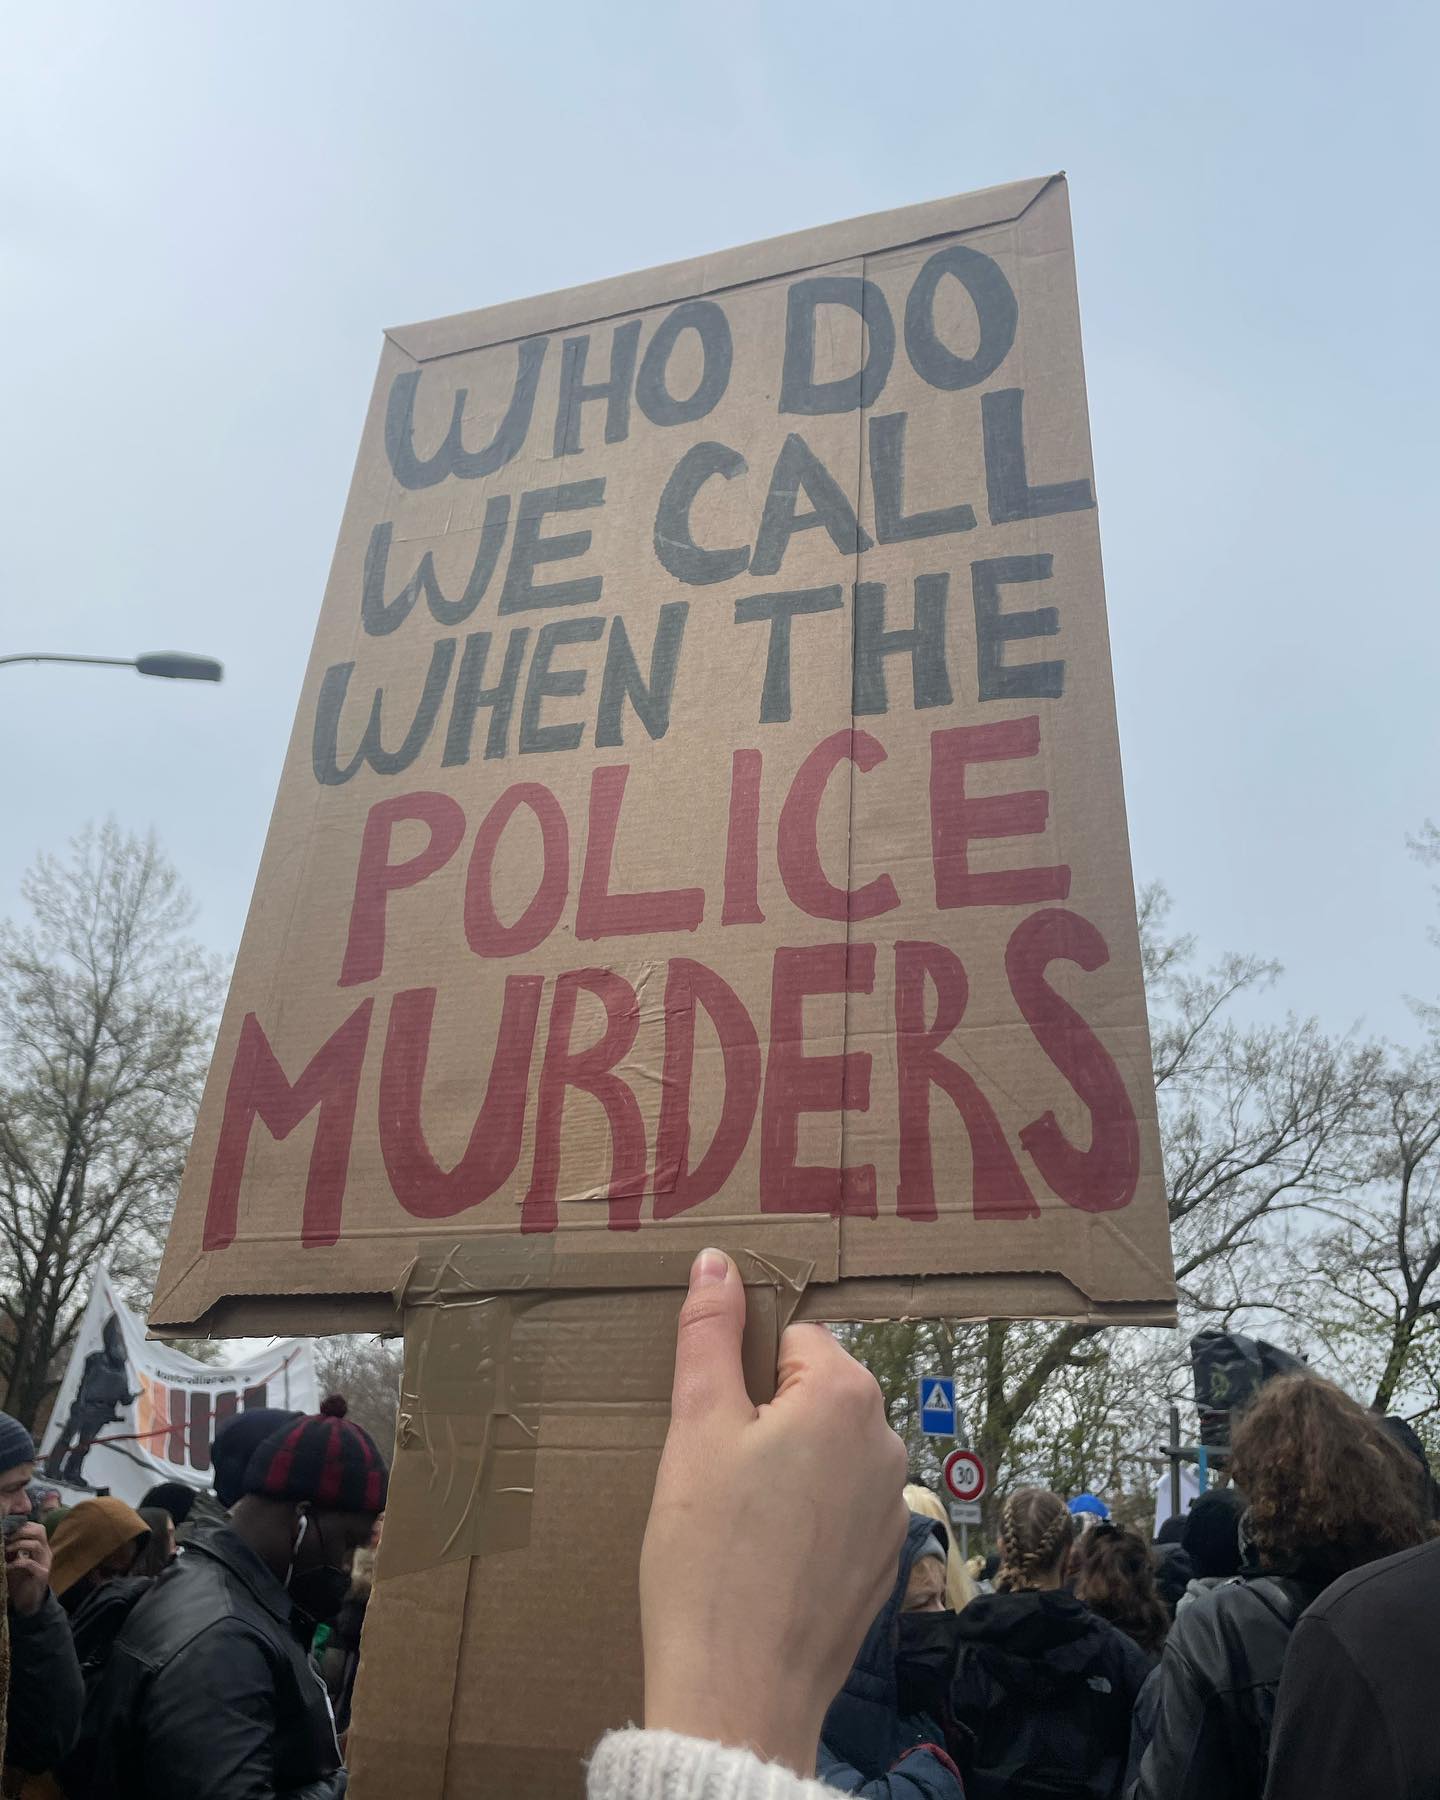 A white protestor in a sizable crowd at a demonstration against police violence in Lausanne, Switzerland last spring is holding a sign in English that asks the question “Who do we call when the police murders.”